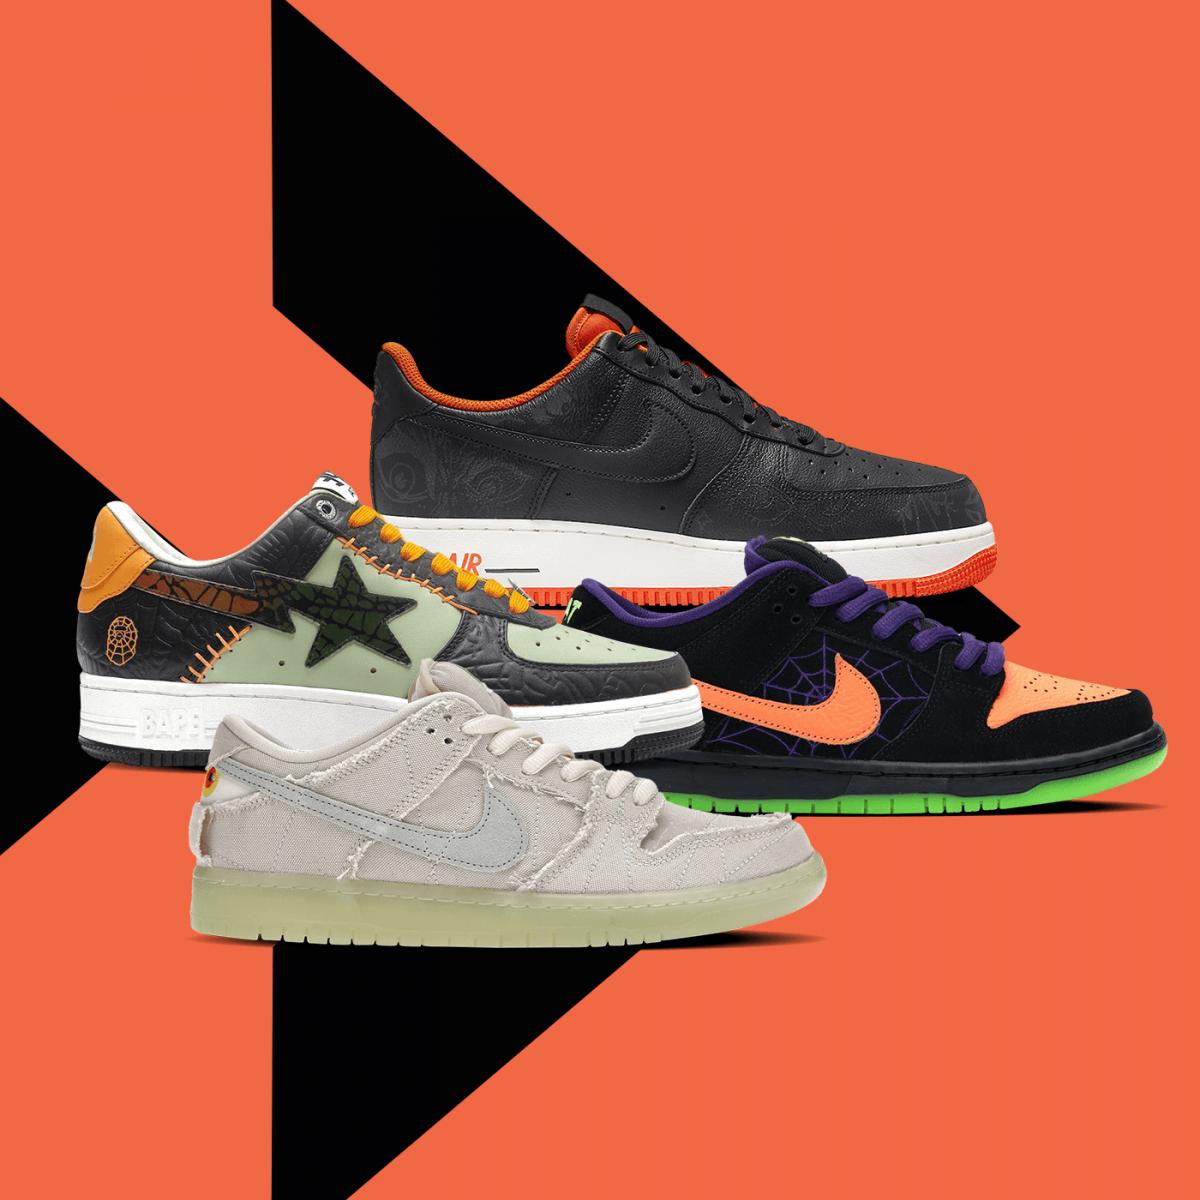 The Best Nike Shoes for Men in 2020 - StockX News